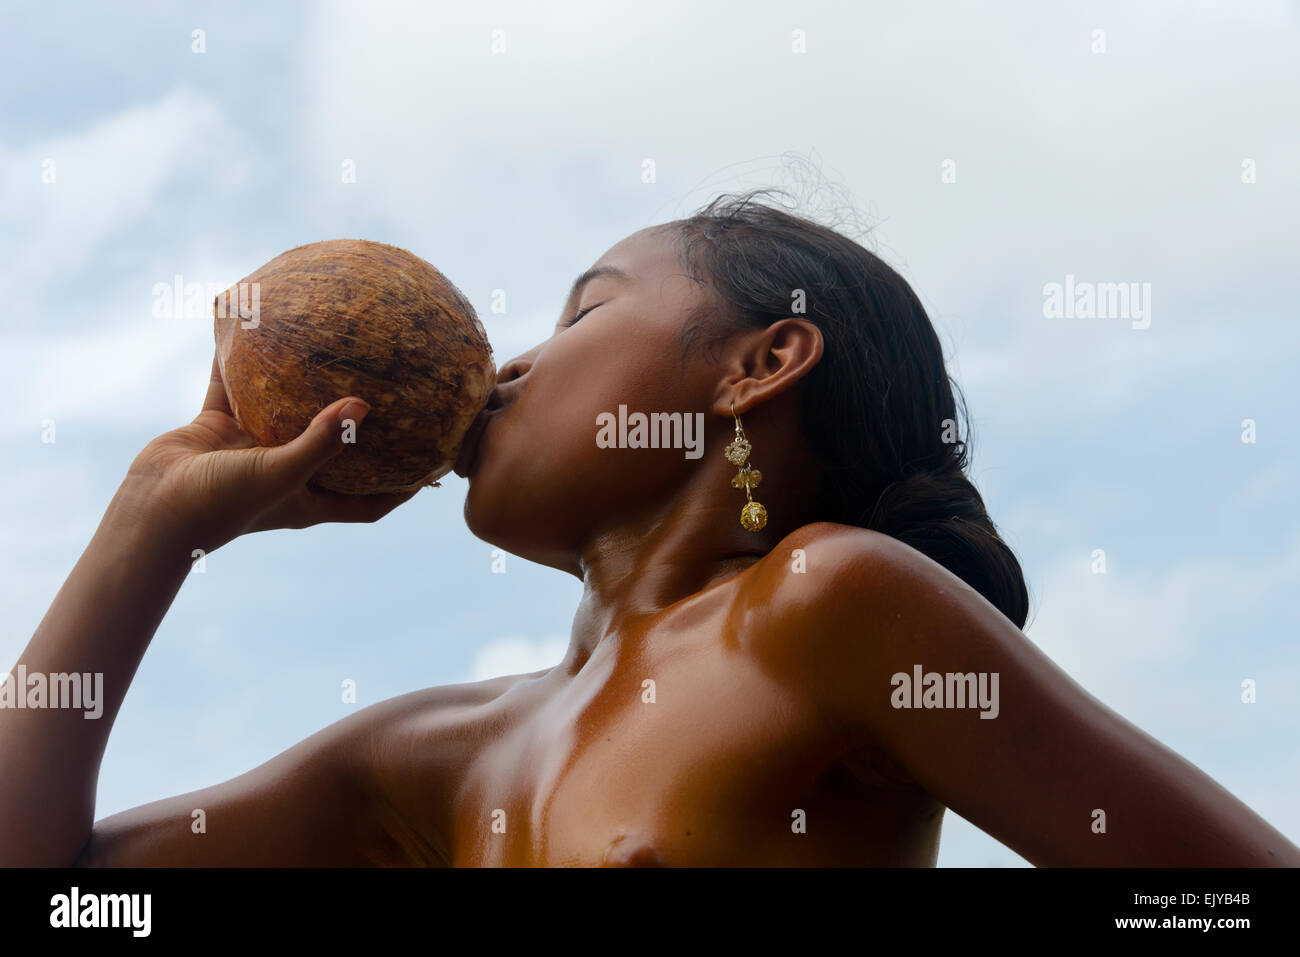 Yapese girl drinking from coconut, Yap Island, Federated States of Micronesia Stock Photo